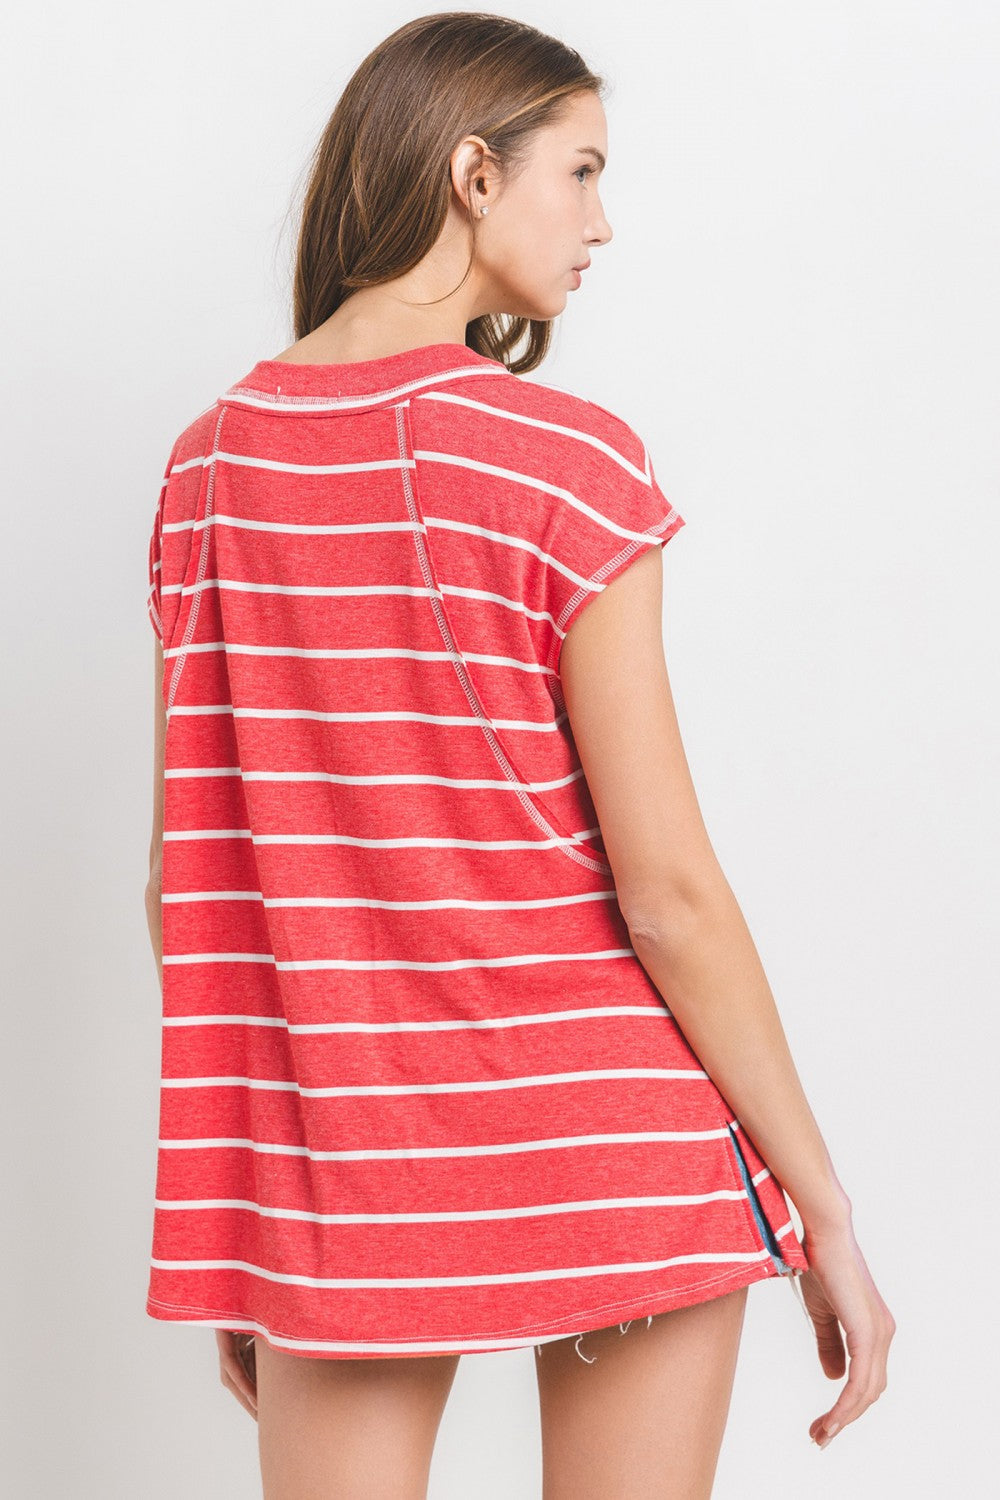 Red Zone Striped Top (Red/White)